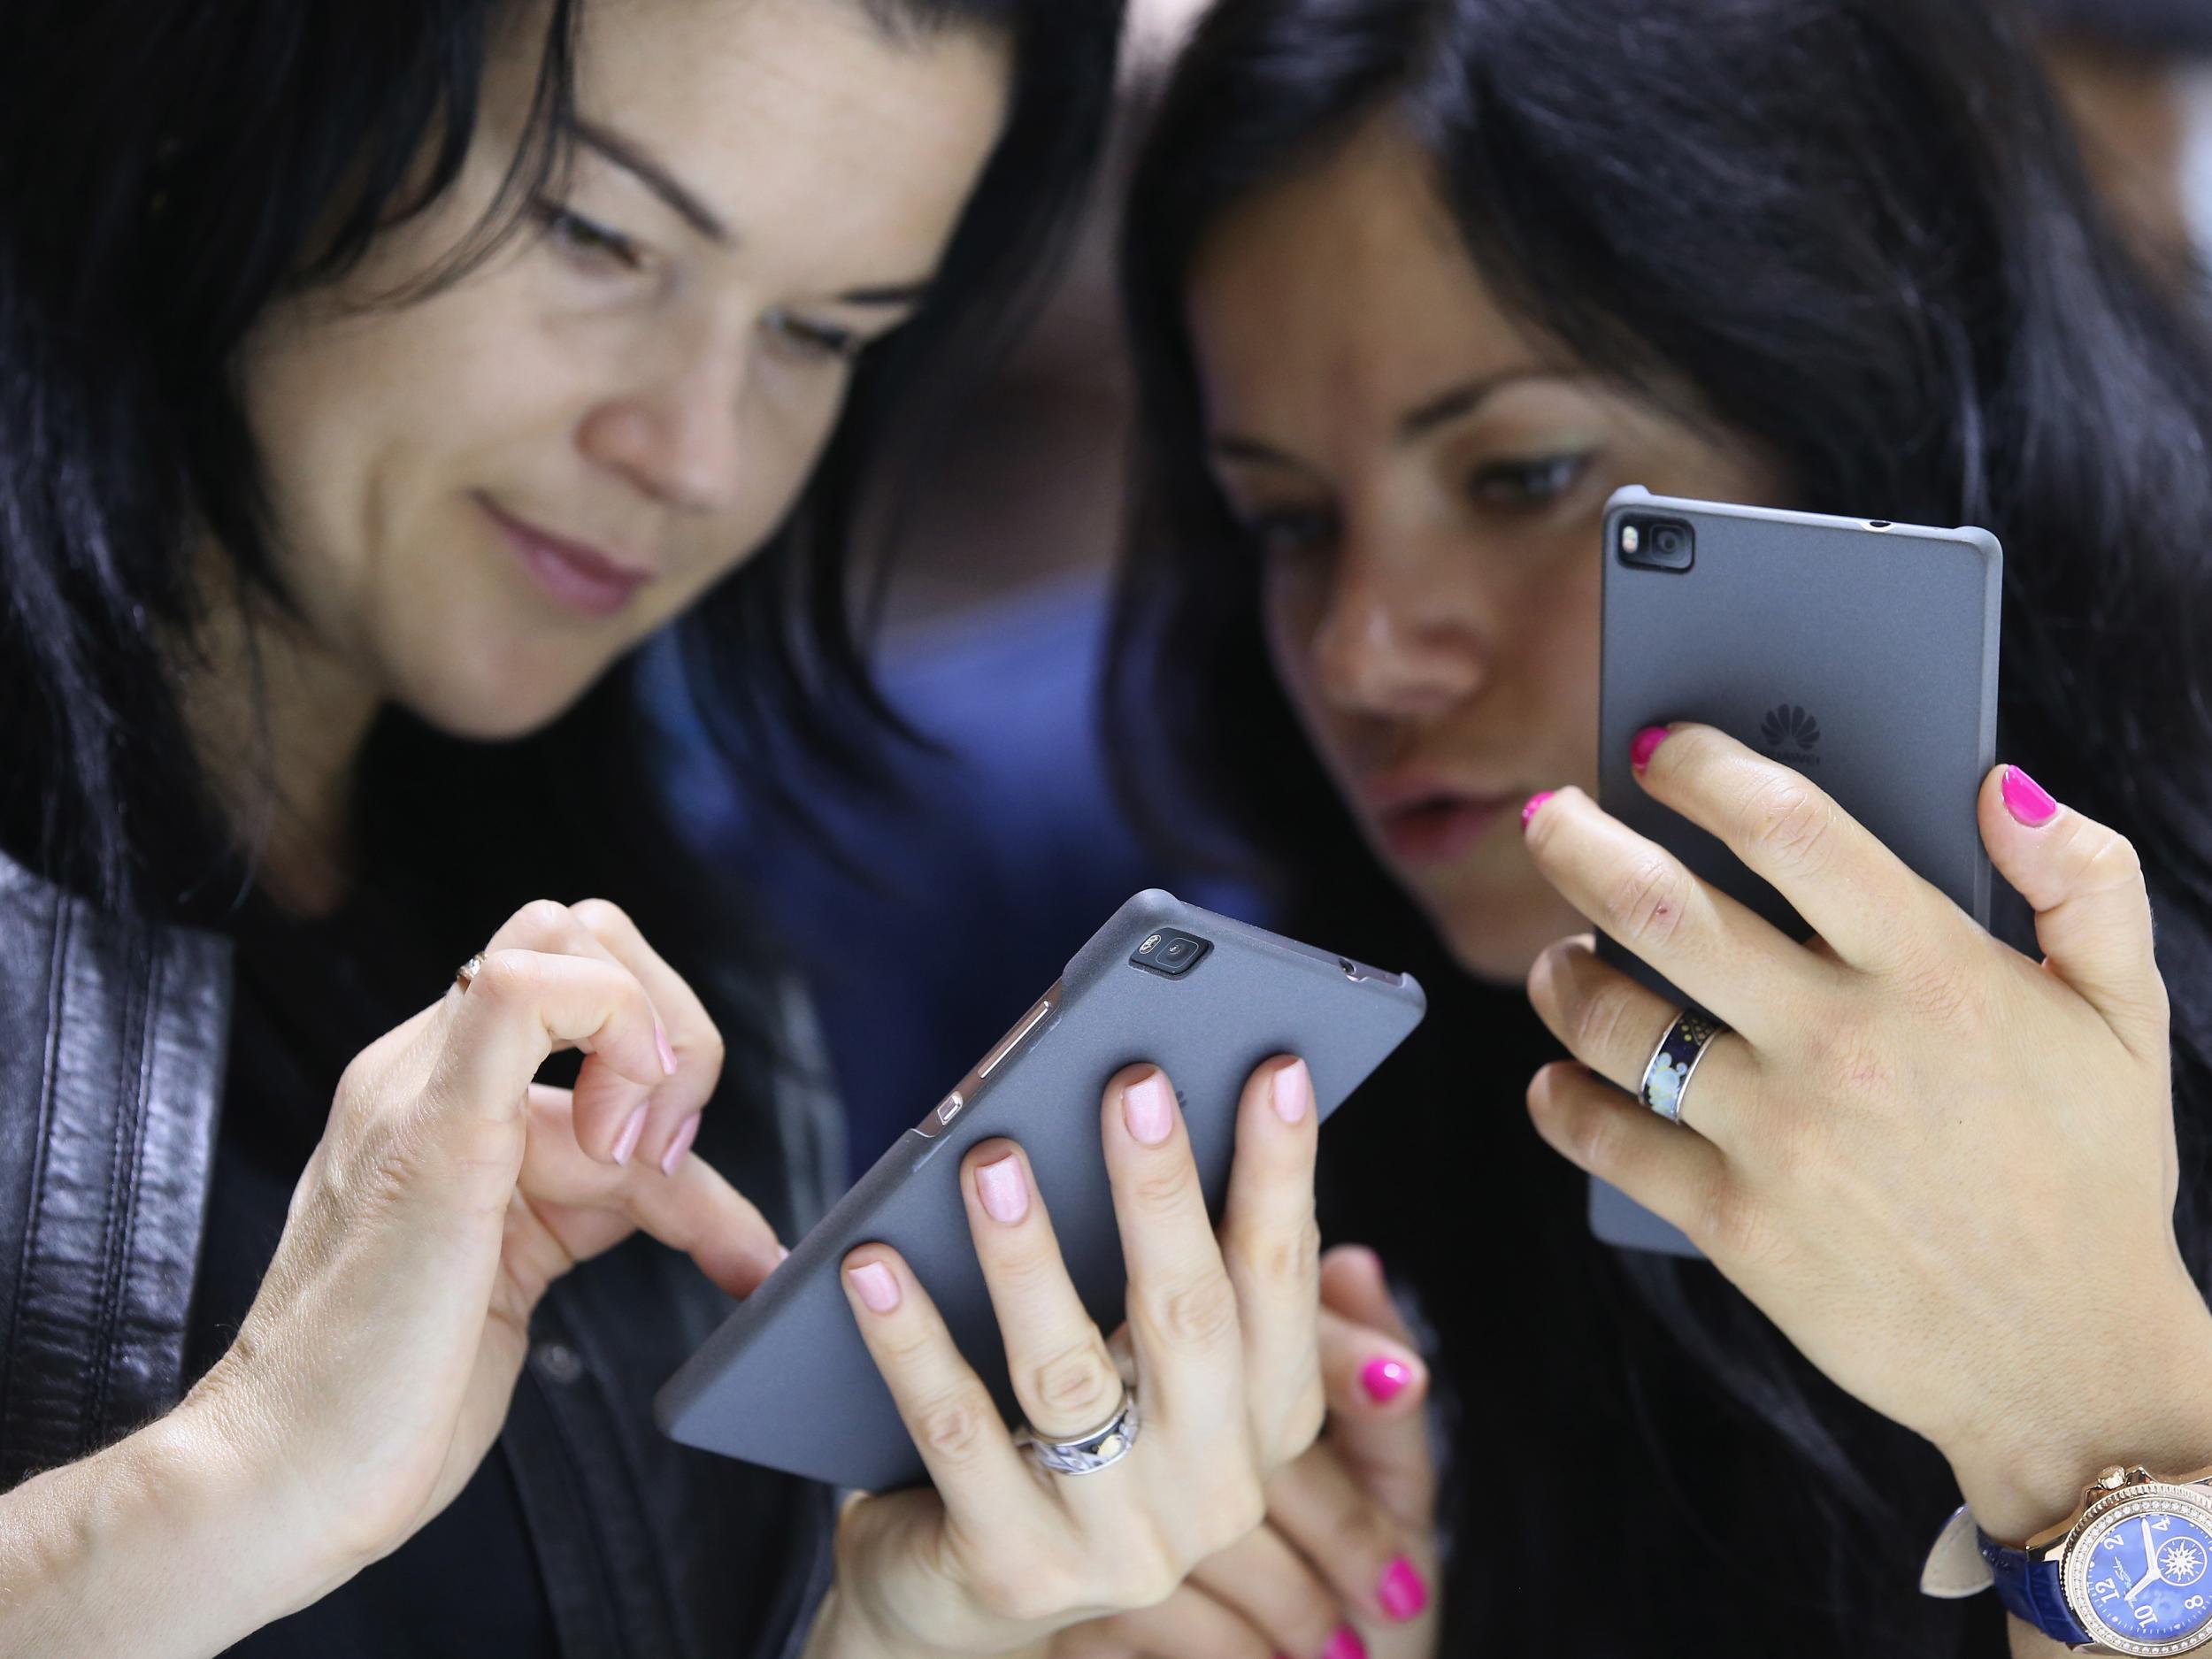 Visitors try out the Honor 7 smartphone at the Huawei stand at the 2015 IFA consumer electronics and appliances trade fair on September 4, 2015 in Berlin, Germany